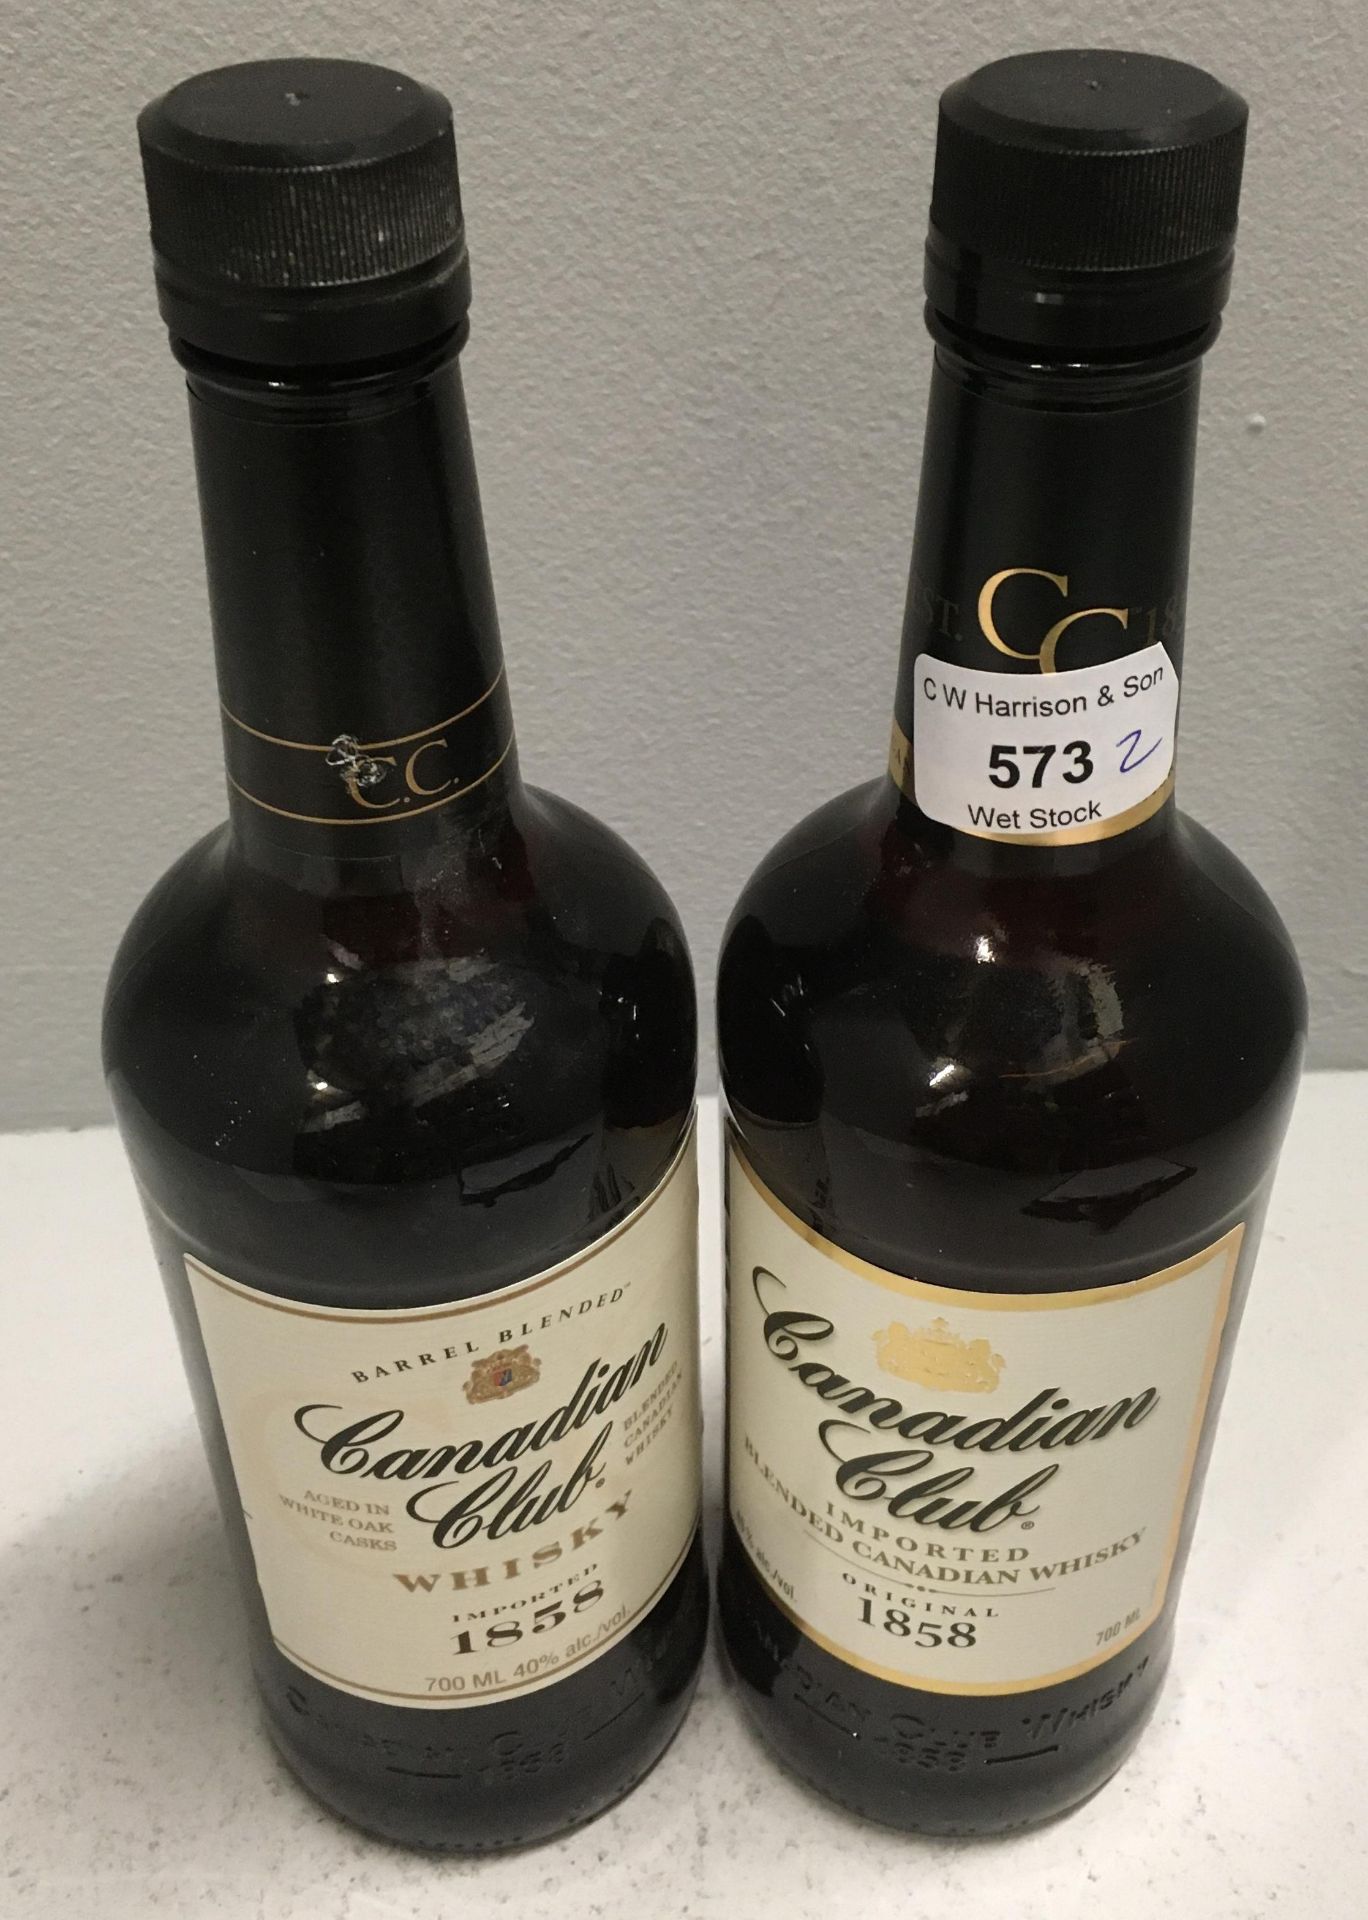 2 x 700ml bottles of Canadian Club Whisky